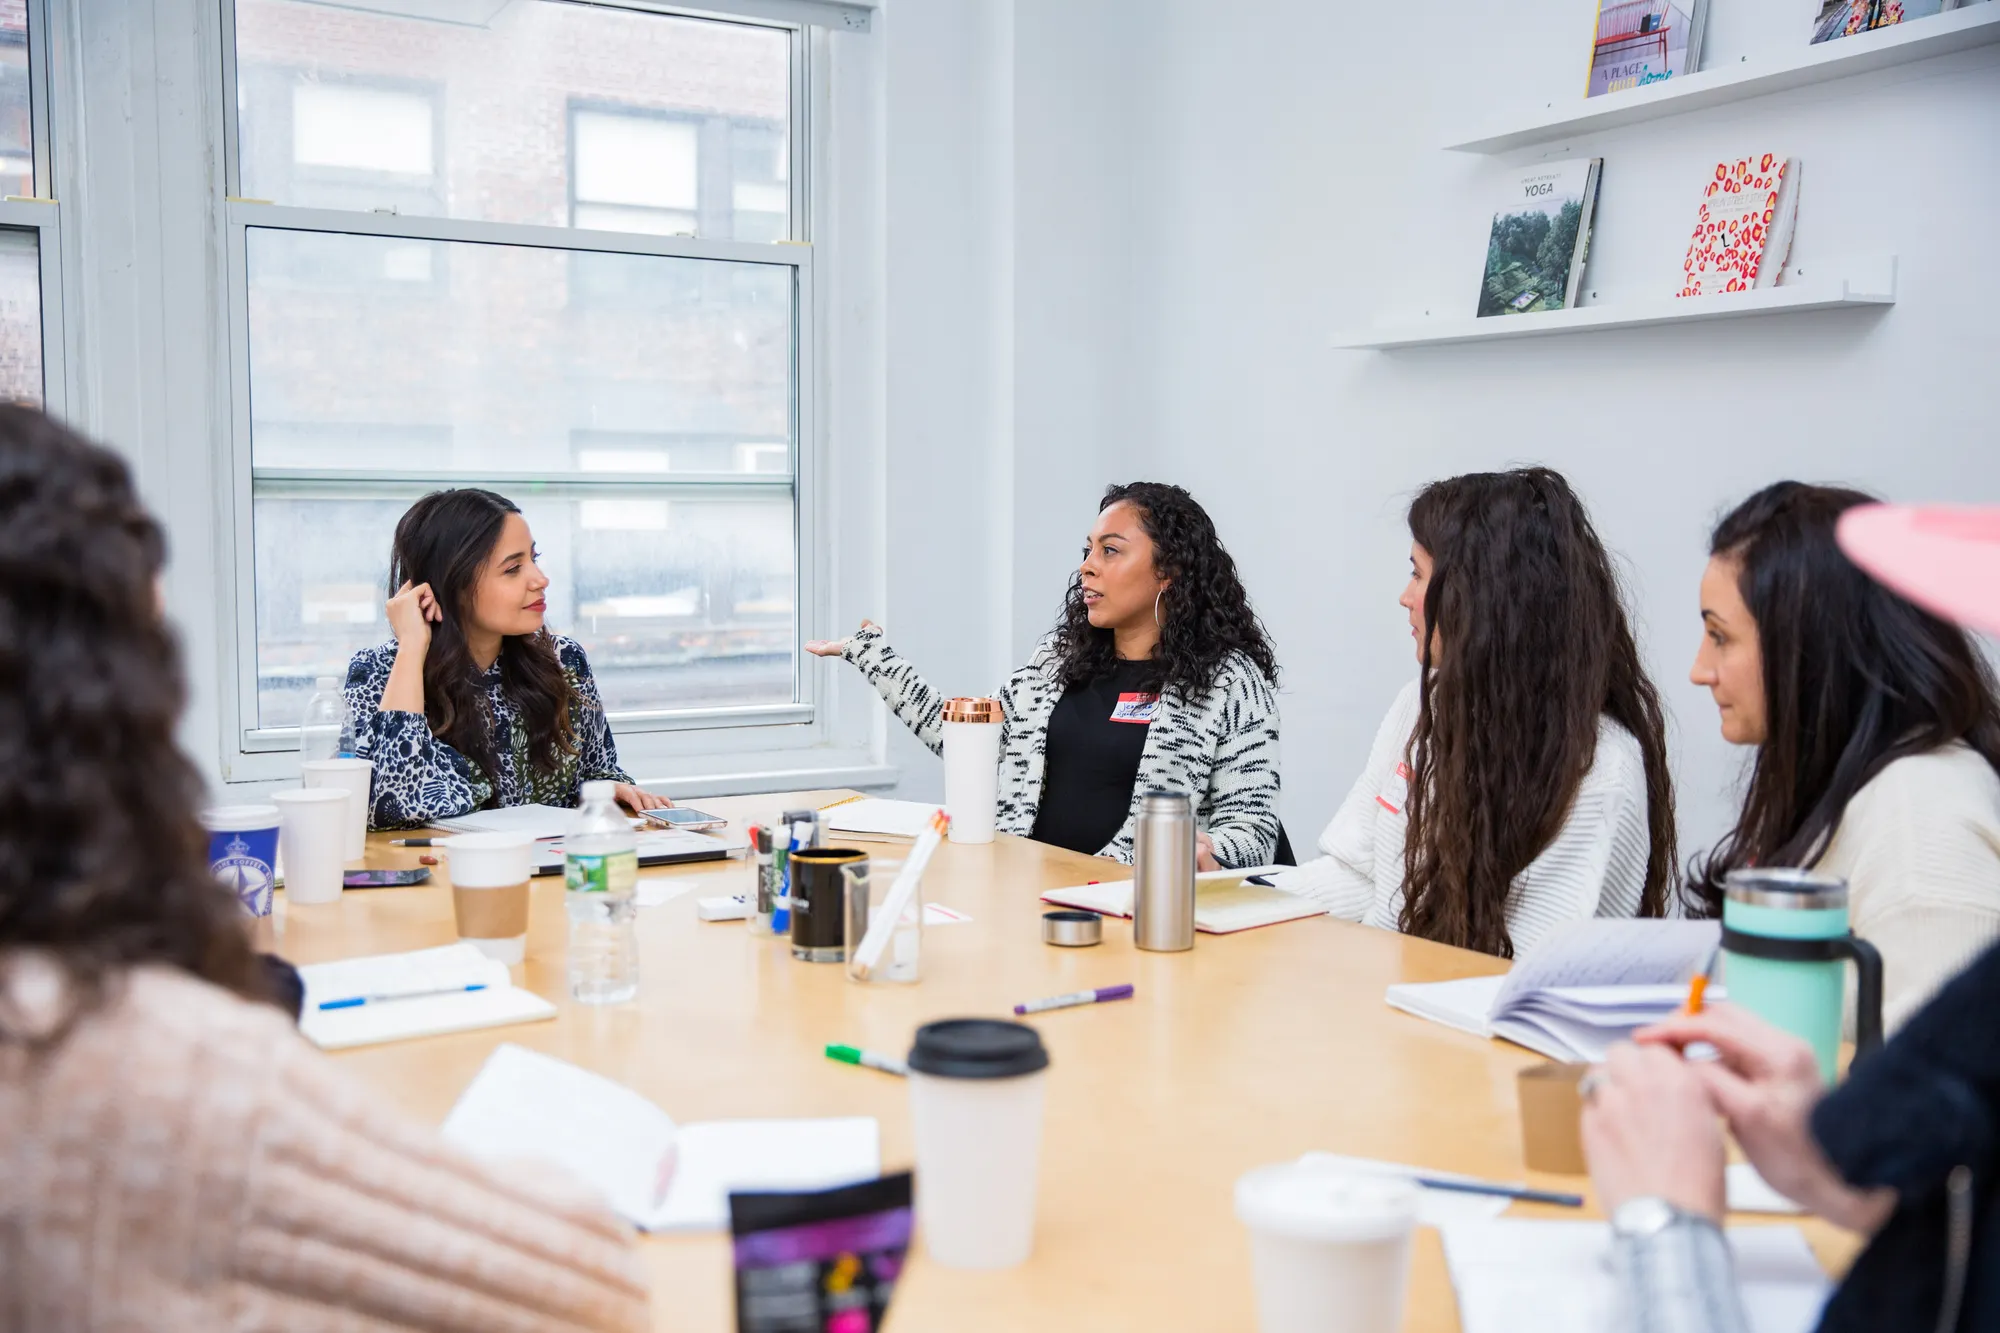 Image of Lisa Nicole Rosado and other women entrepreneurs around a conference room table having a conversation.